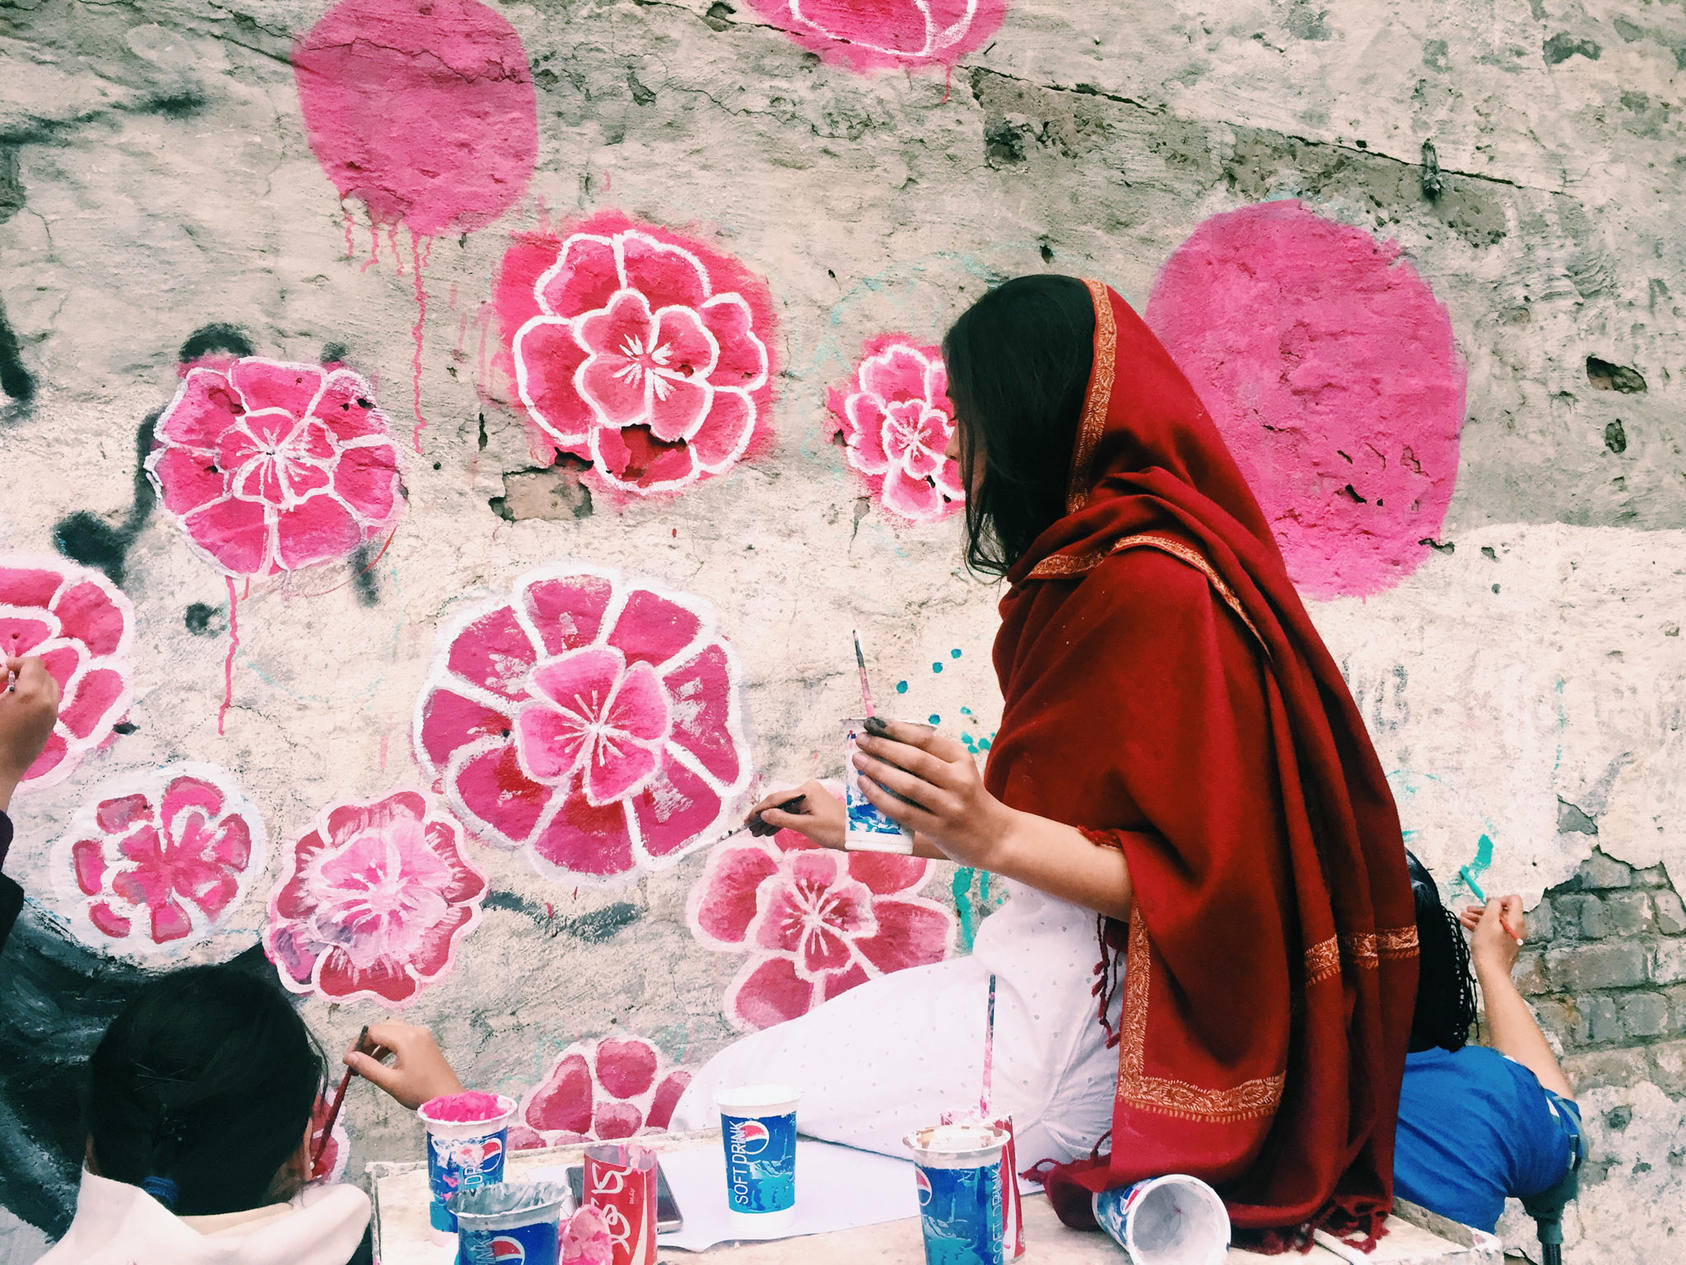 Fearless Collective founder Shilo Shiv Suleman, from India, works with local residents to paint a mural in the Pakistani city of Rawalpindi. (Fearless Collective)